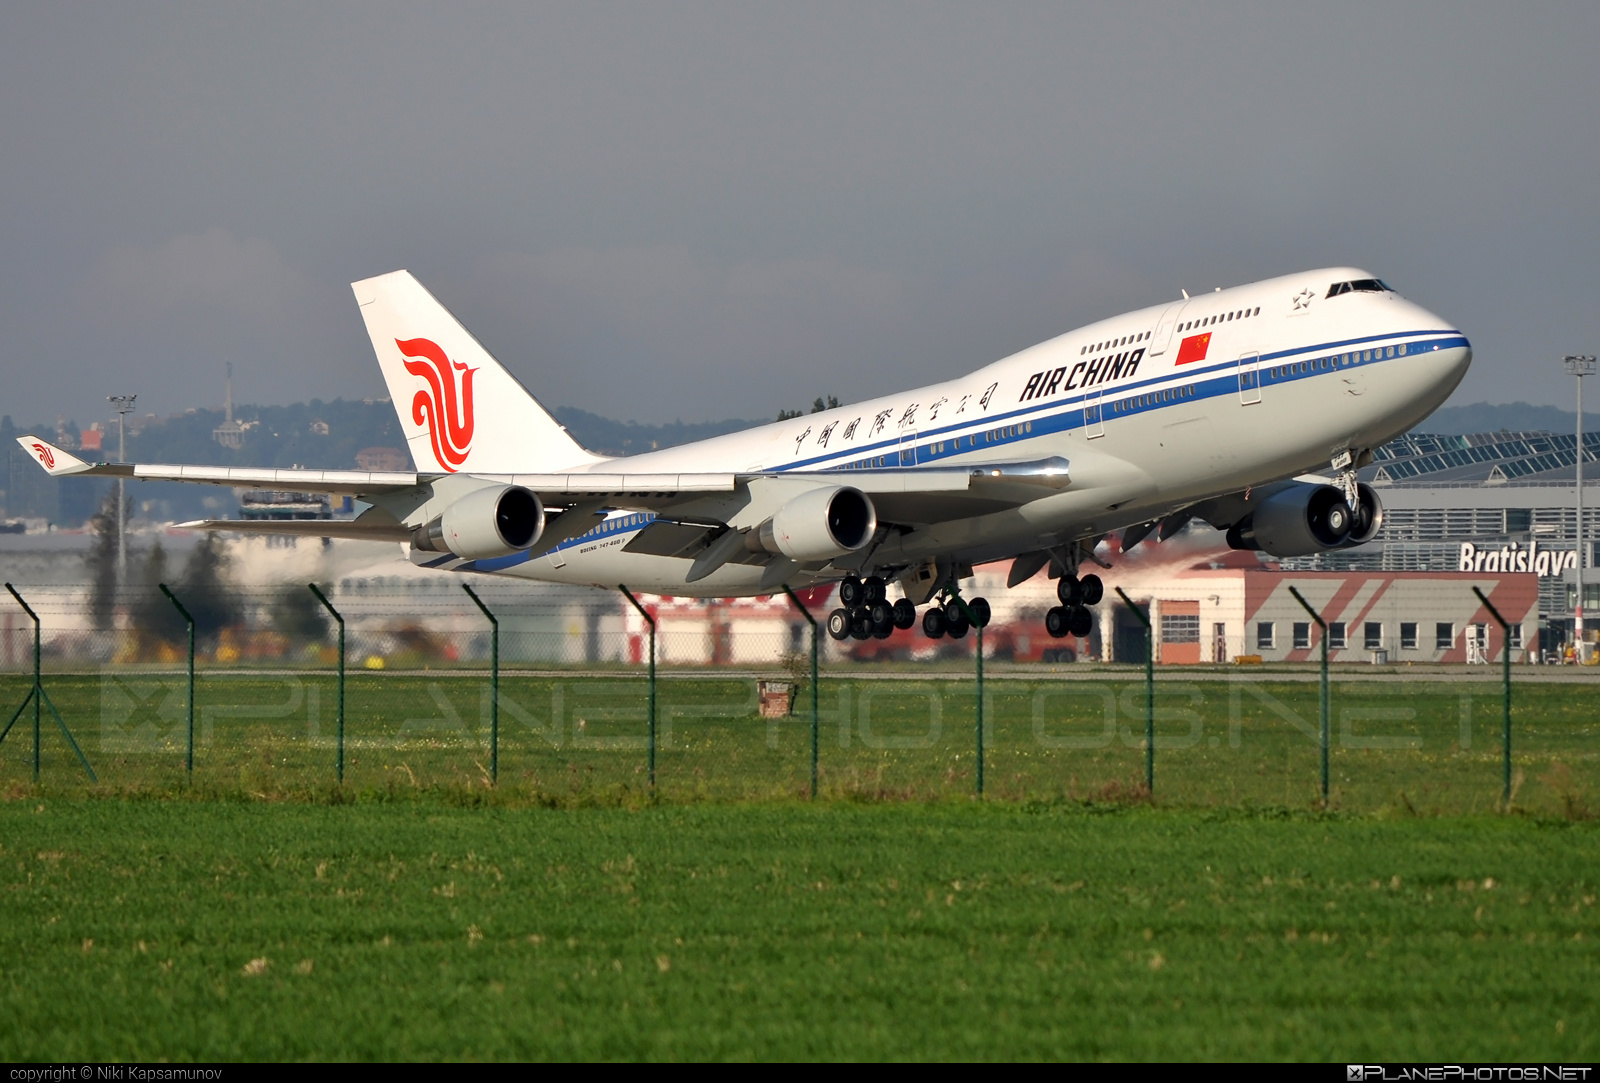 Boeing 747-400 - B-2447 operated by Air China #airchina #b747 #boeing #boeing747 #jumbo